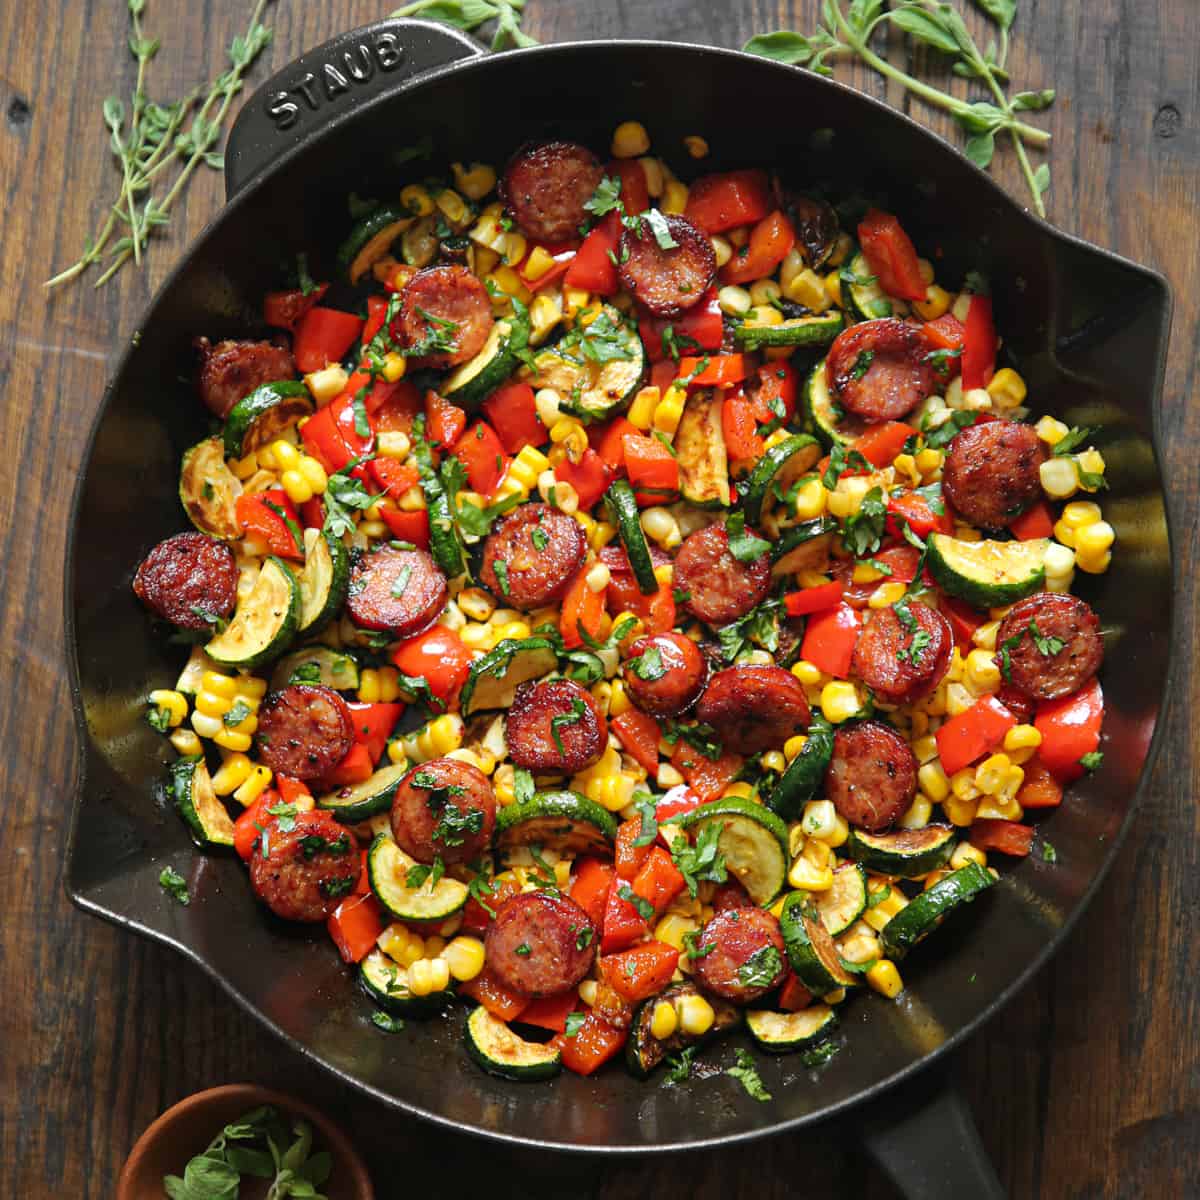 Sausage and Veggies Skillet with Bell Peppers, Zucchini, and Corn